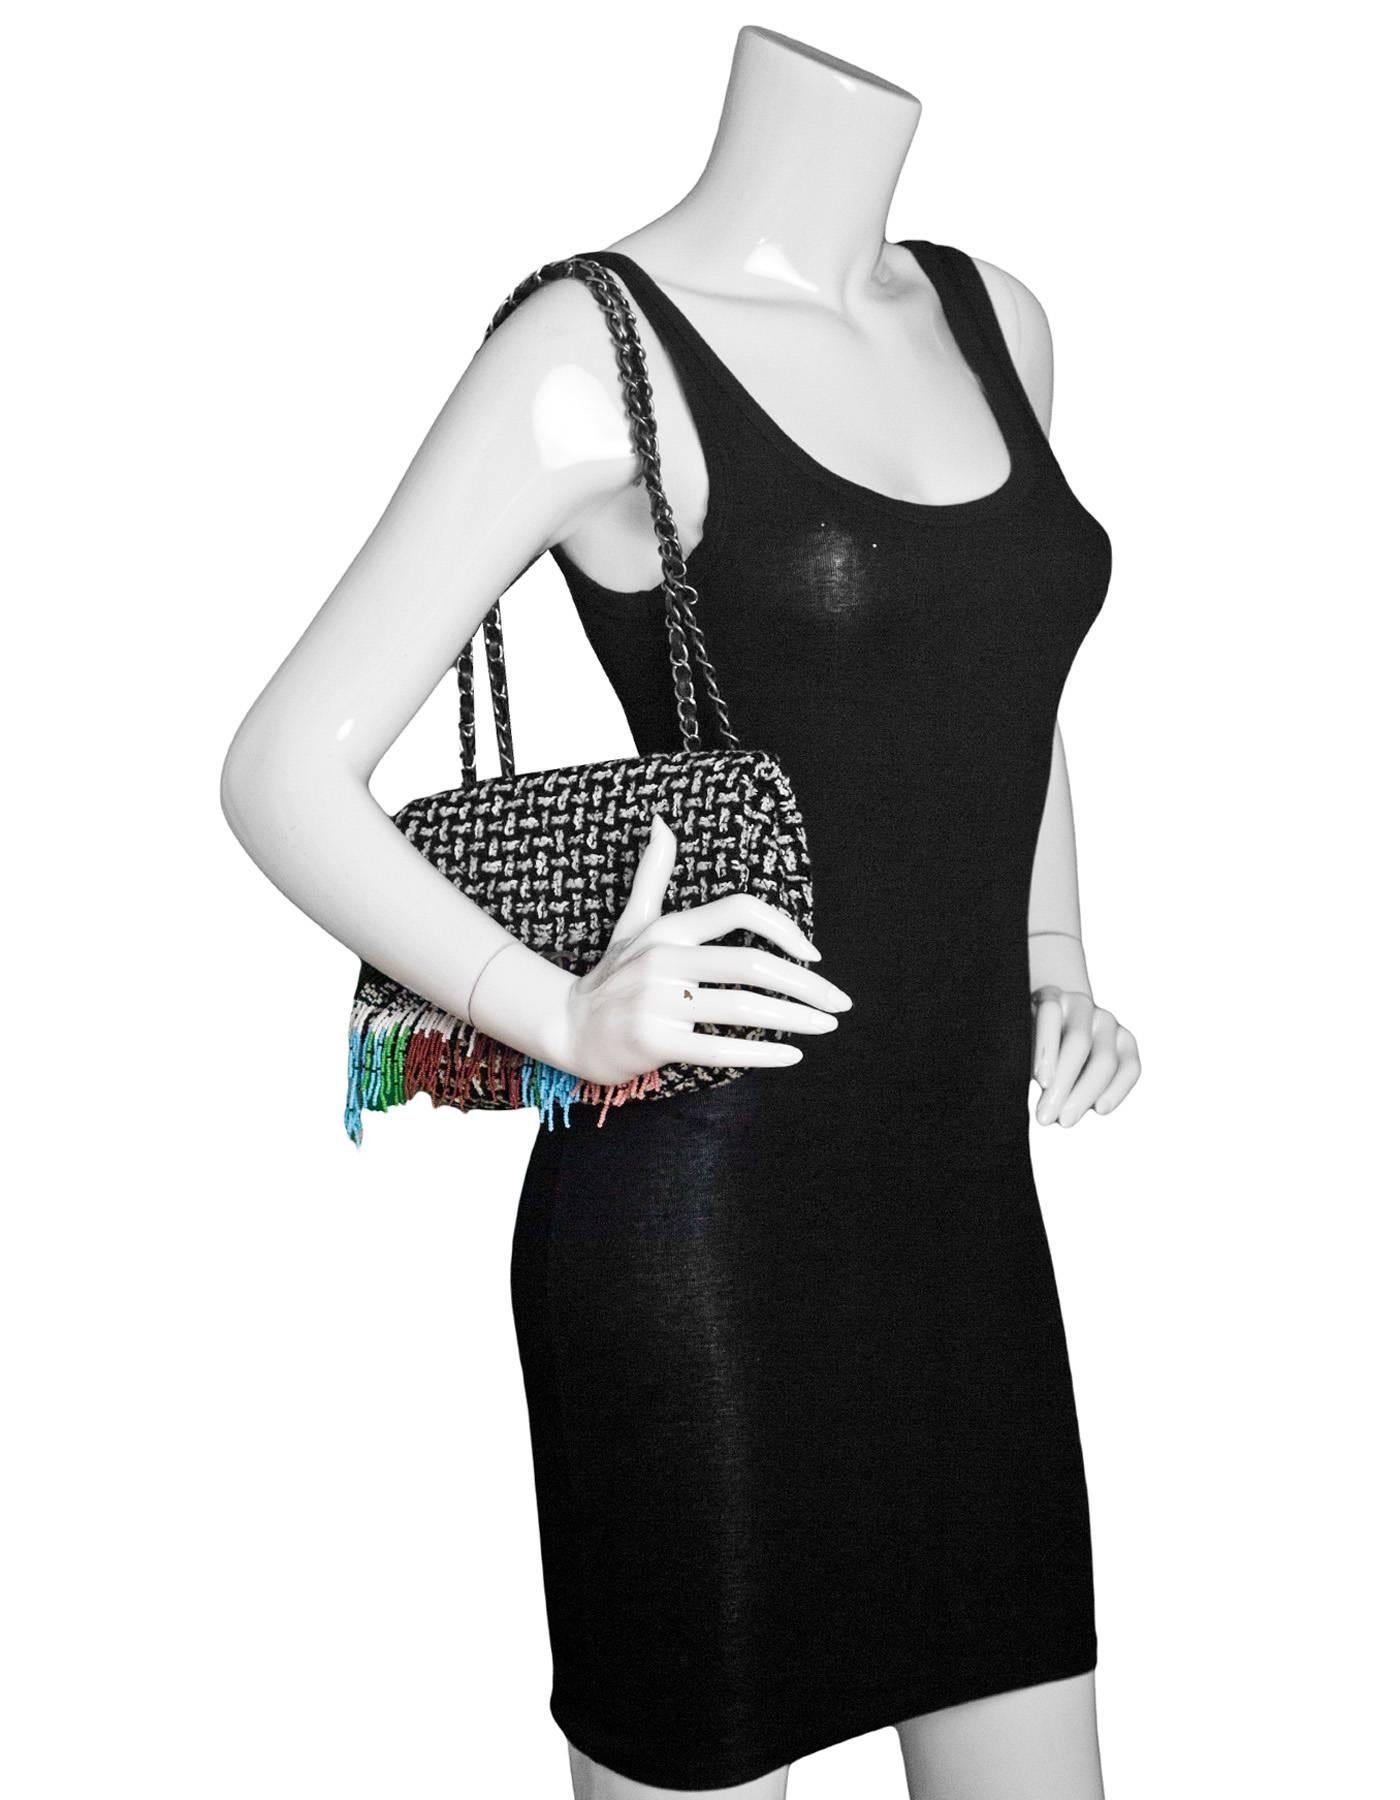 Chanel Black & White Tweed Paris/Dallas Beaded Flap Bag
Features adjustable shoulder strap

Made in: Italy
Year of Production: 2014
Color: Black, white, multi
Hardware: Gunmetal
Materials: Tweed, leather, metal, beads
Lining: Black